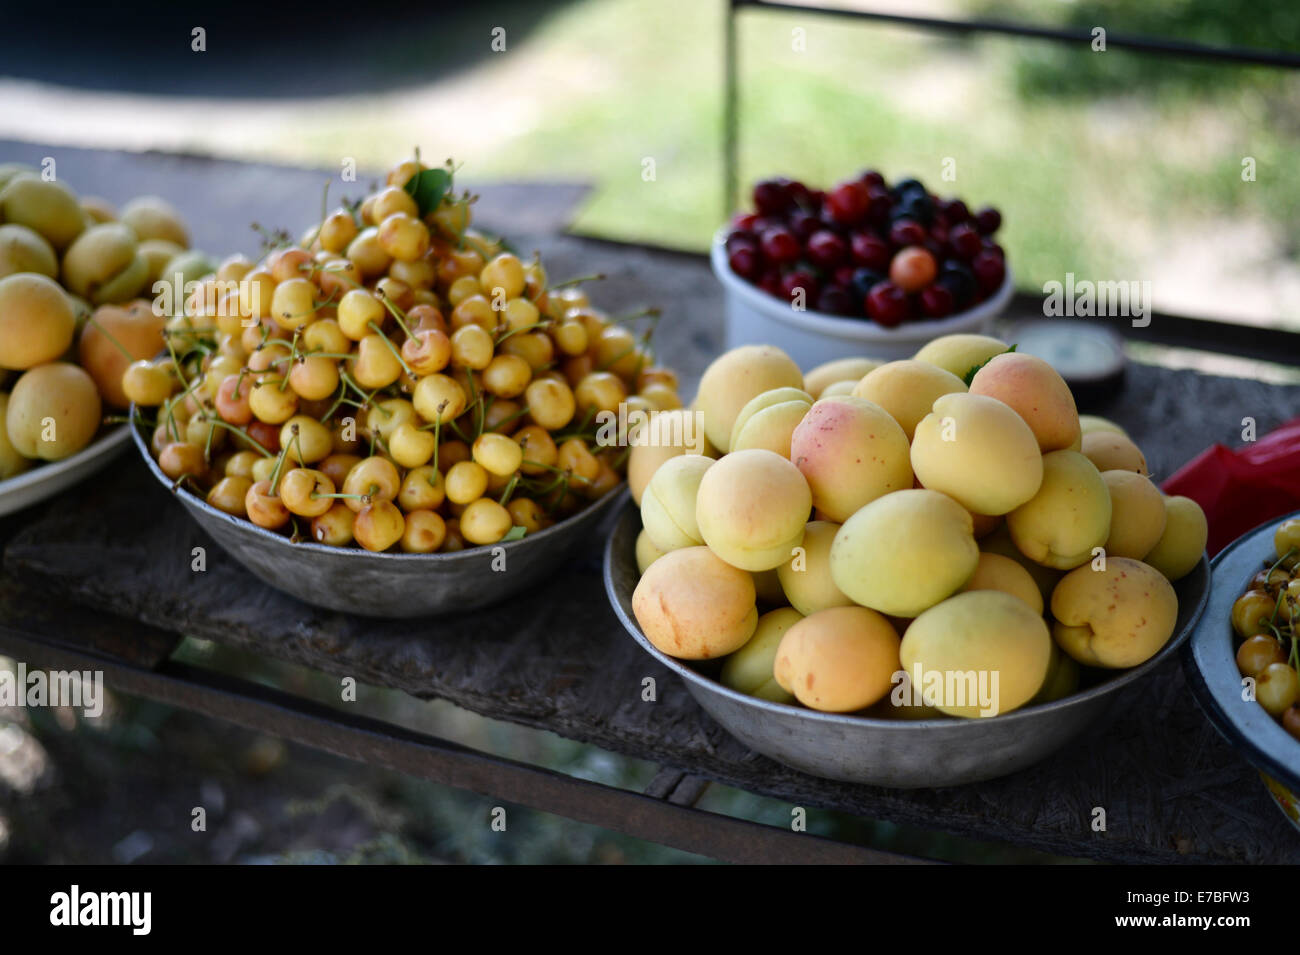 Apricots and cherries lie on a sales booth in the Armenian capital Yerevan on 28 June 2014. The apricot was known in Armenia in antiquity already and it is assumed that Armenia is its native country. Photo: Jens Kalaene -NO WIRE SERVICE- Stock Photo